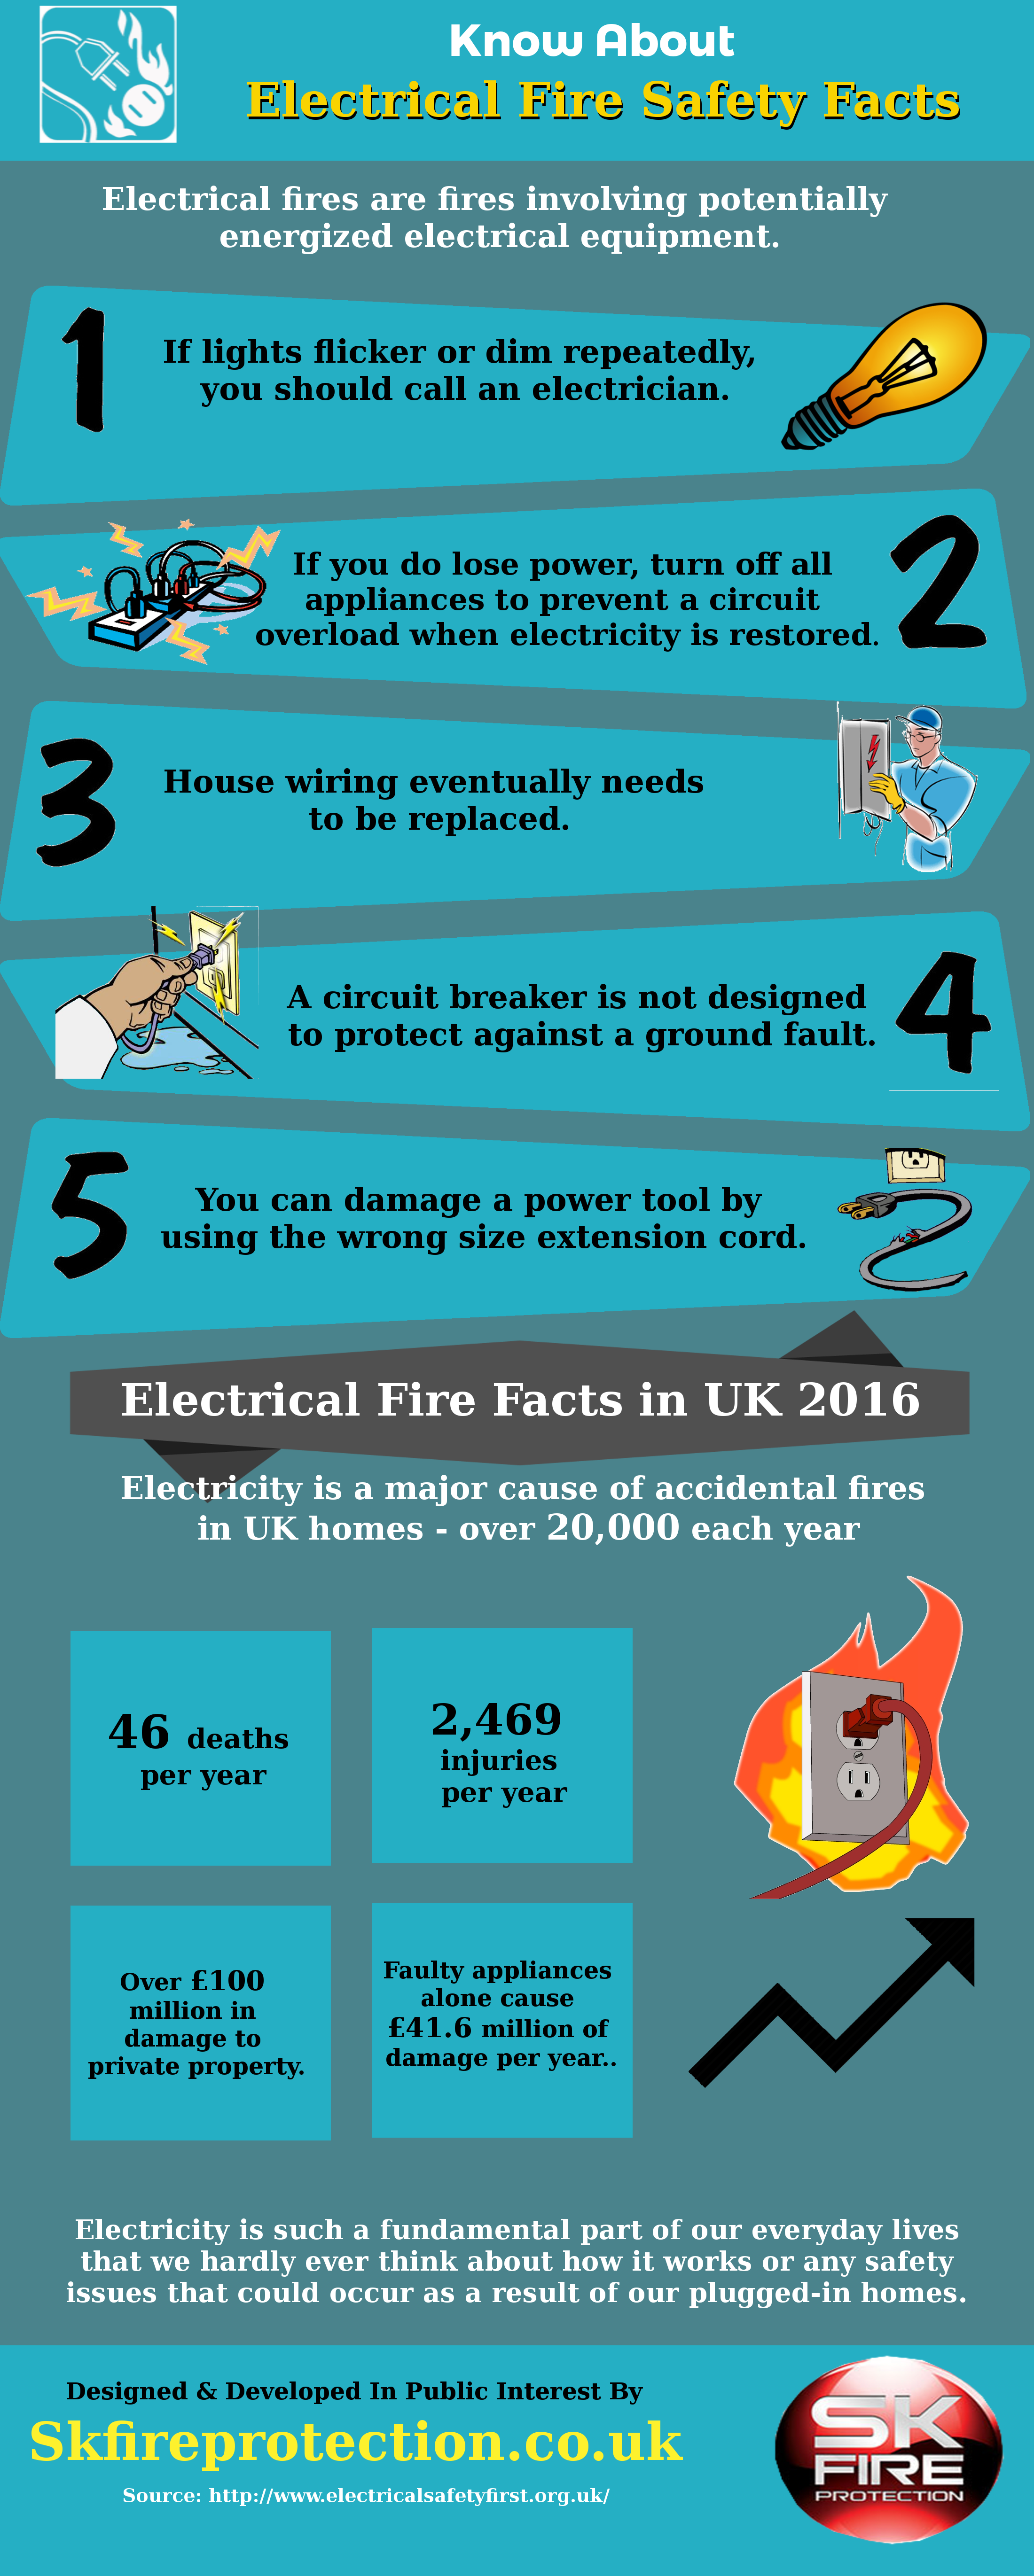 Know About Electrical Fire Safety Facts | Visual.ly